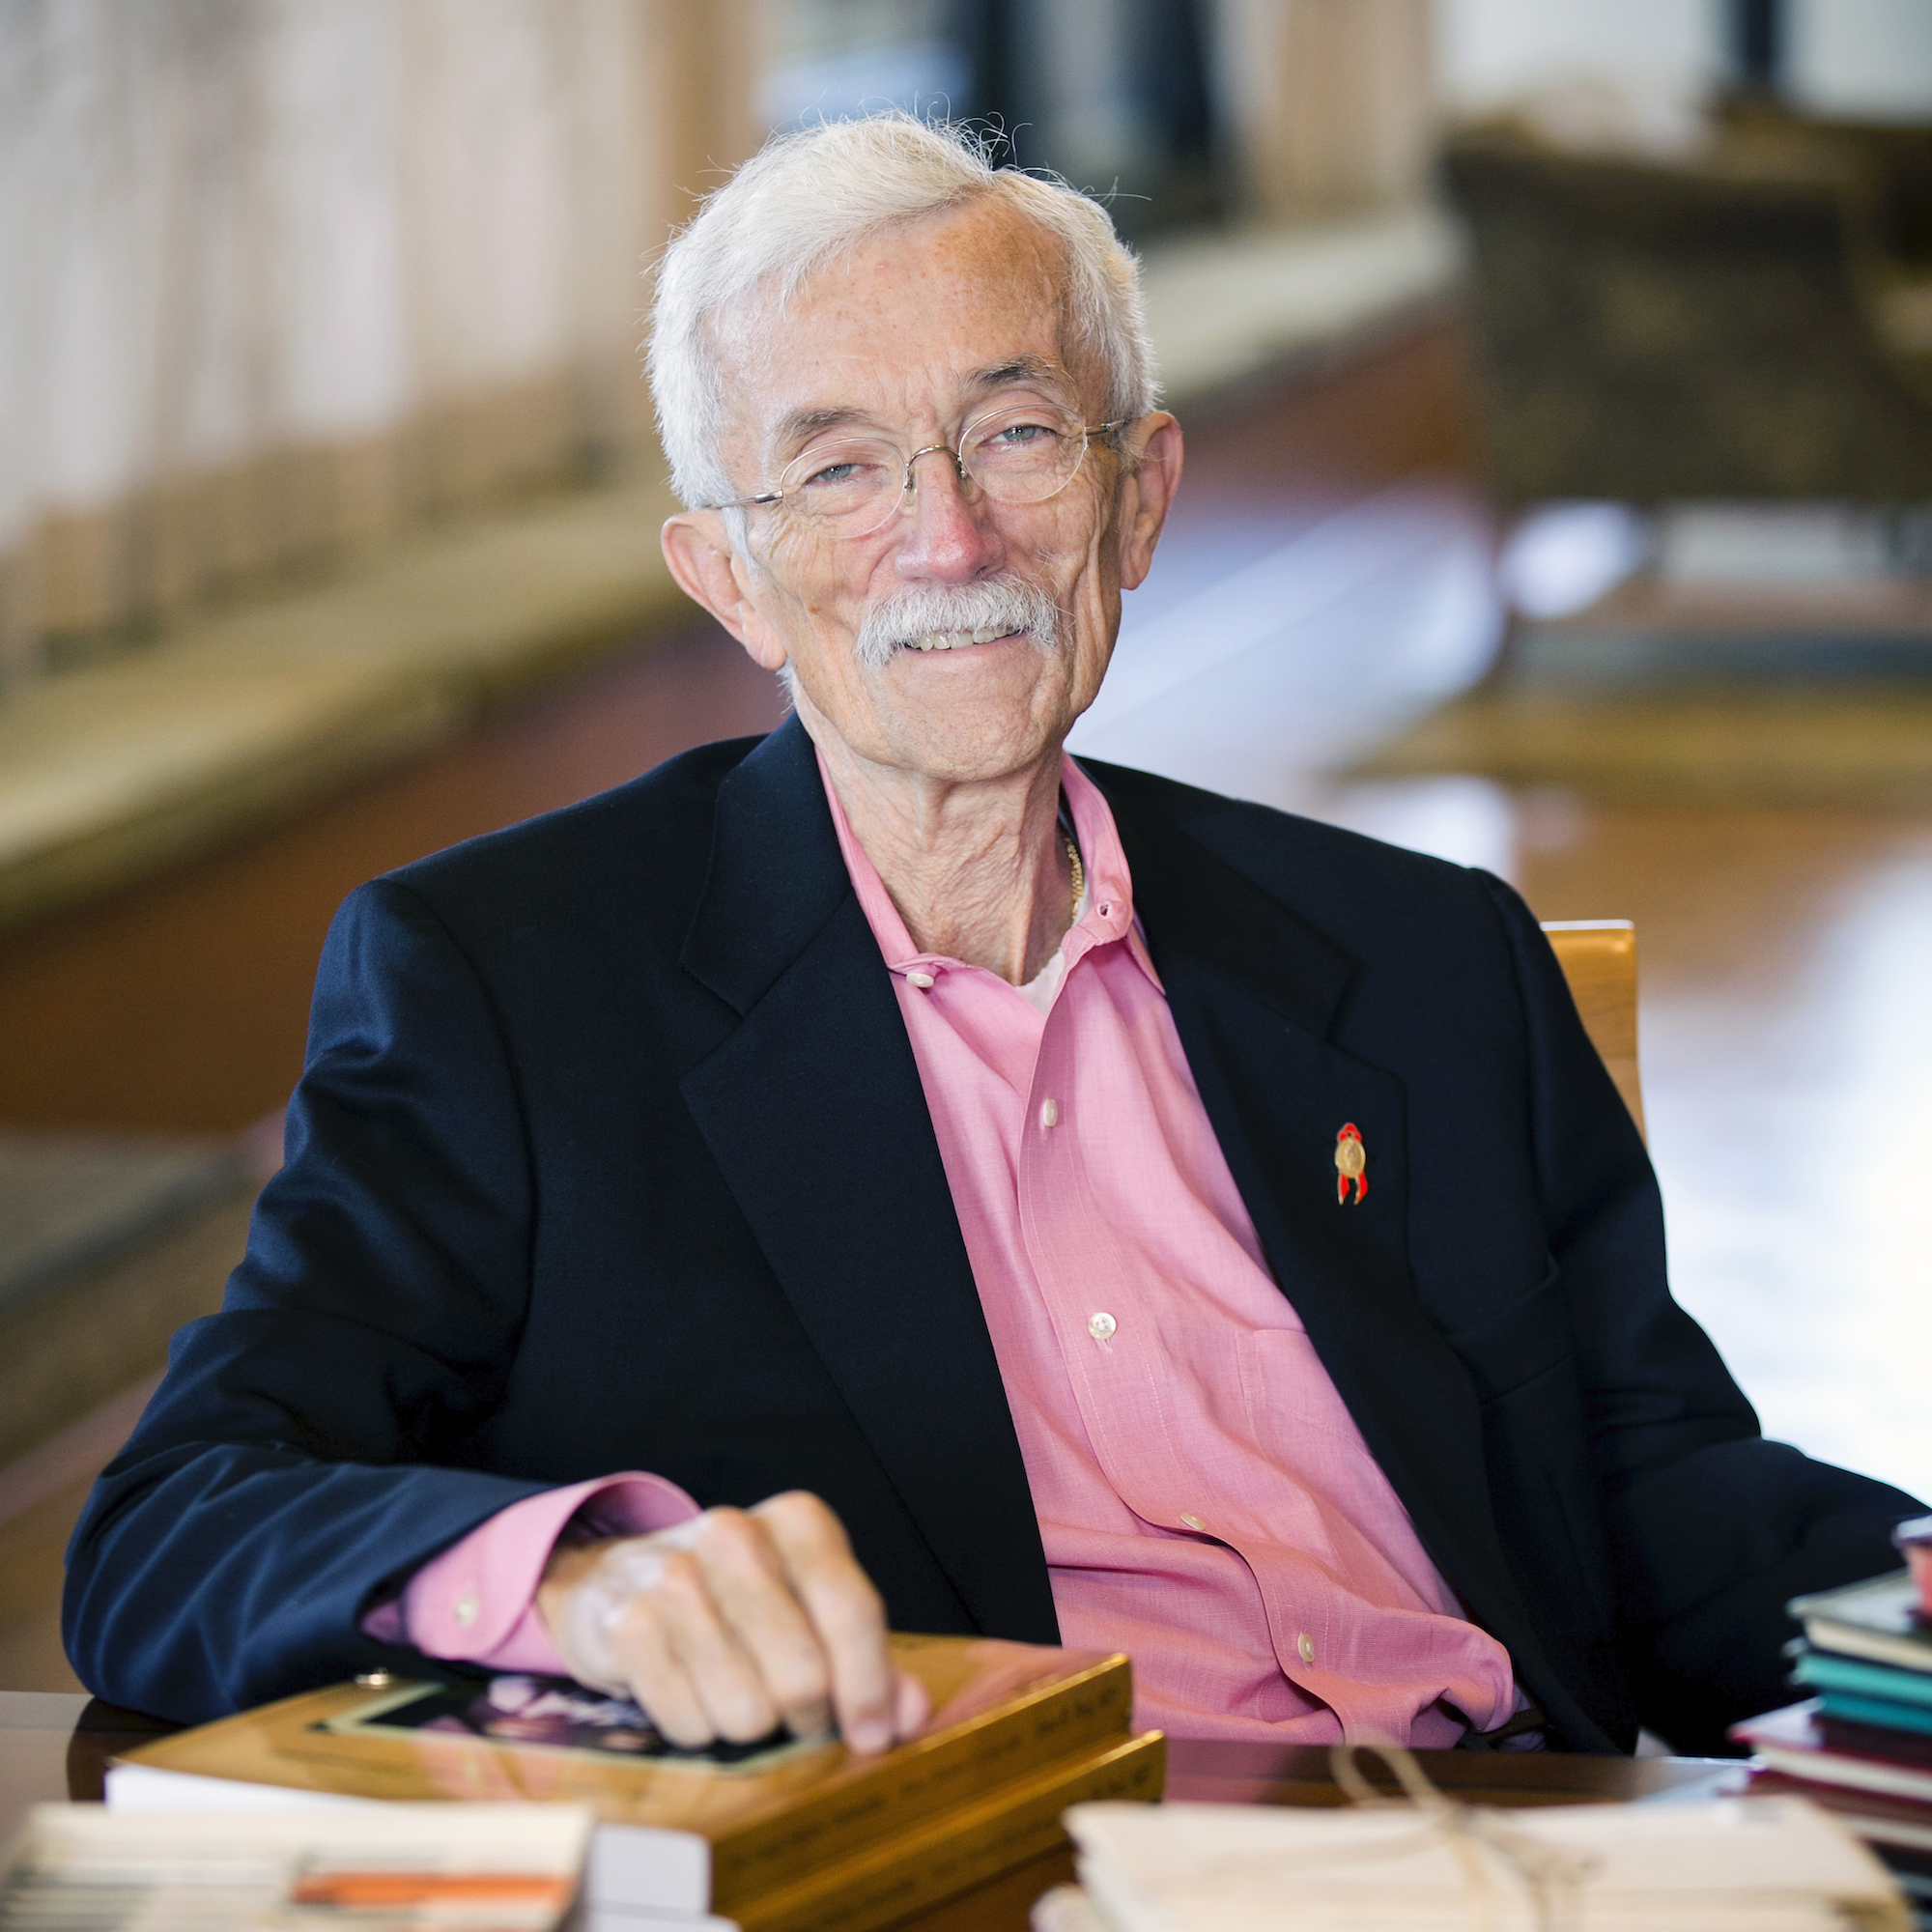 Jesse R. Peel, an older person with light skin tone, white hair and mustache, and wire glasses, seated at book-covered desk